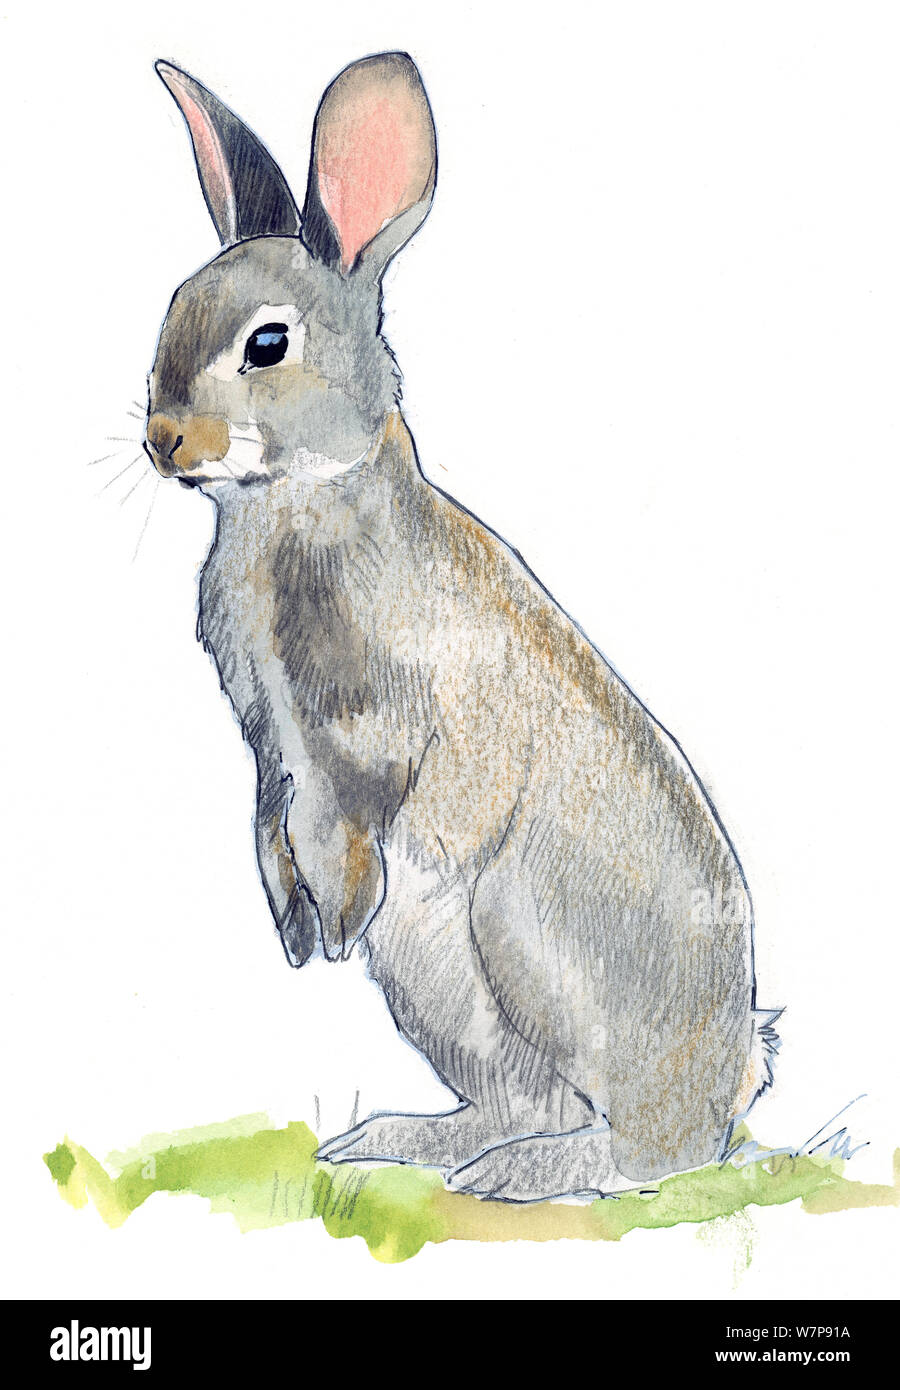 Illustration of European rabbit (Oryctolagus cuniculus). Pencil and watercolor painting. Stock Photo